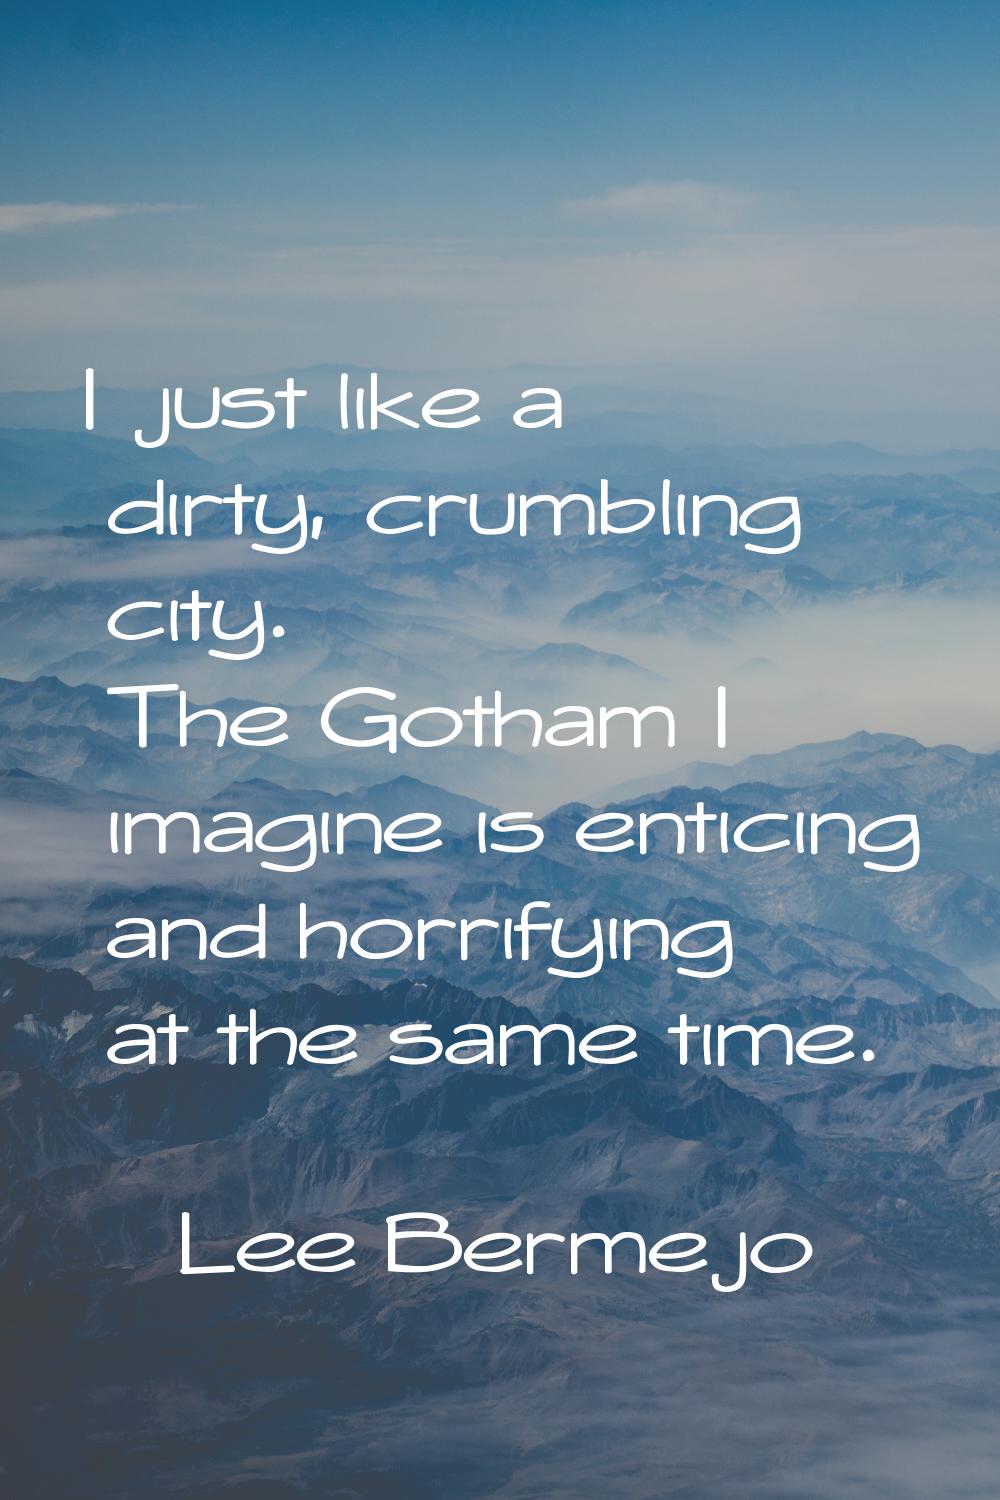 I just like a dirty, crumbling city. The Gotham I imagine is enticing and horrifying at the same ti